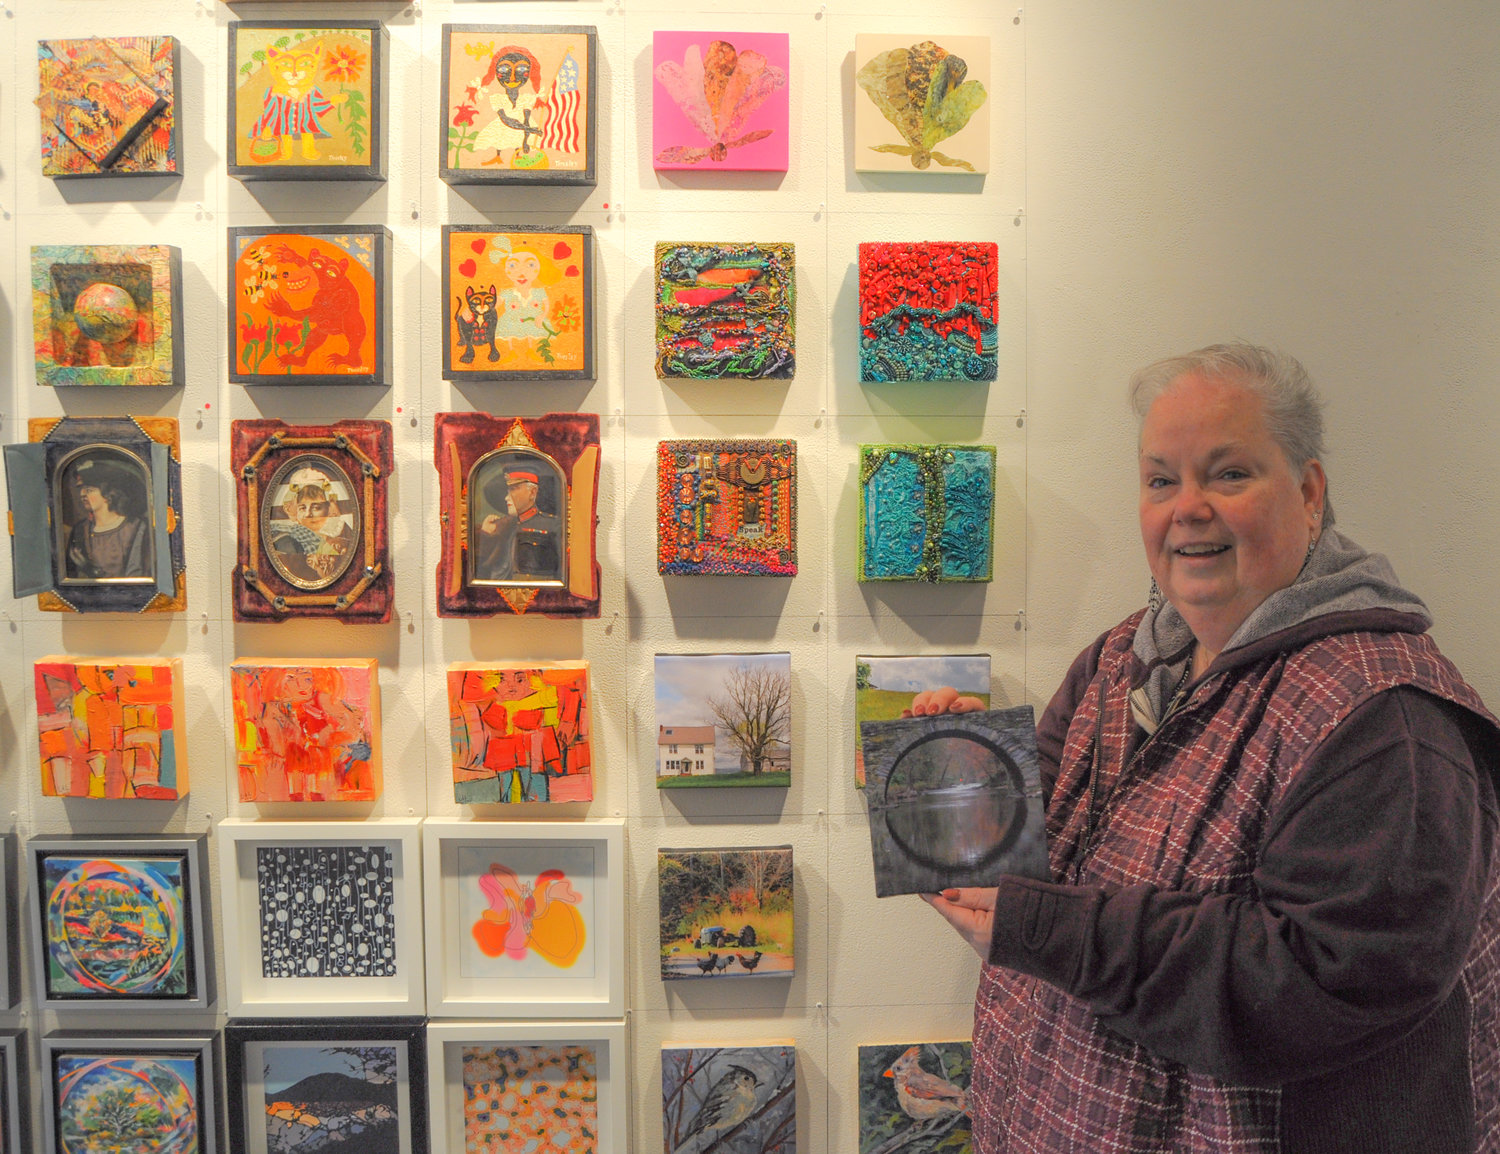 I attended "Art in Sixes" at the DVAA last weekend, in time to catch the River Reporter’s Eileen Hennessy placing a tiny red dot (sold!) next to one of my six-by-six inch photos on canvas. Thanks, Eileen!